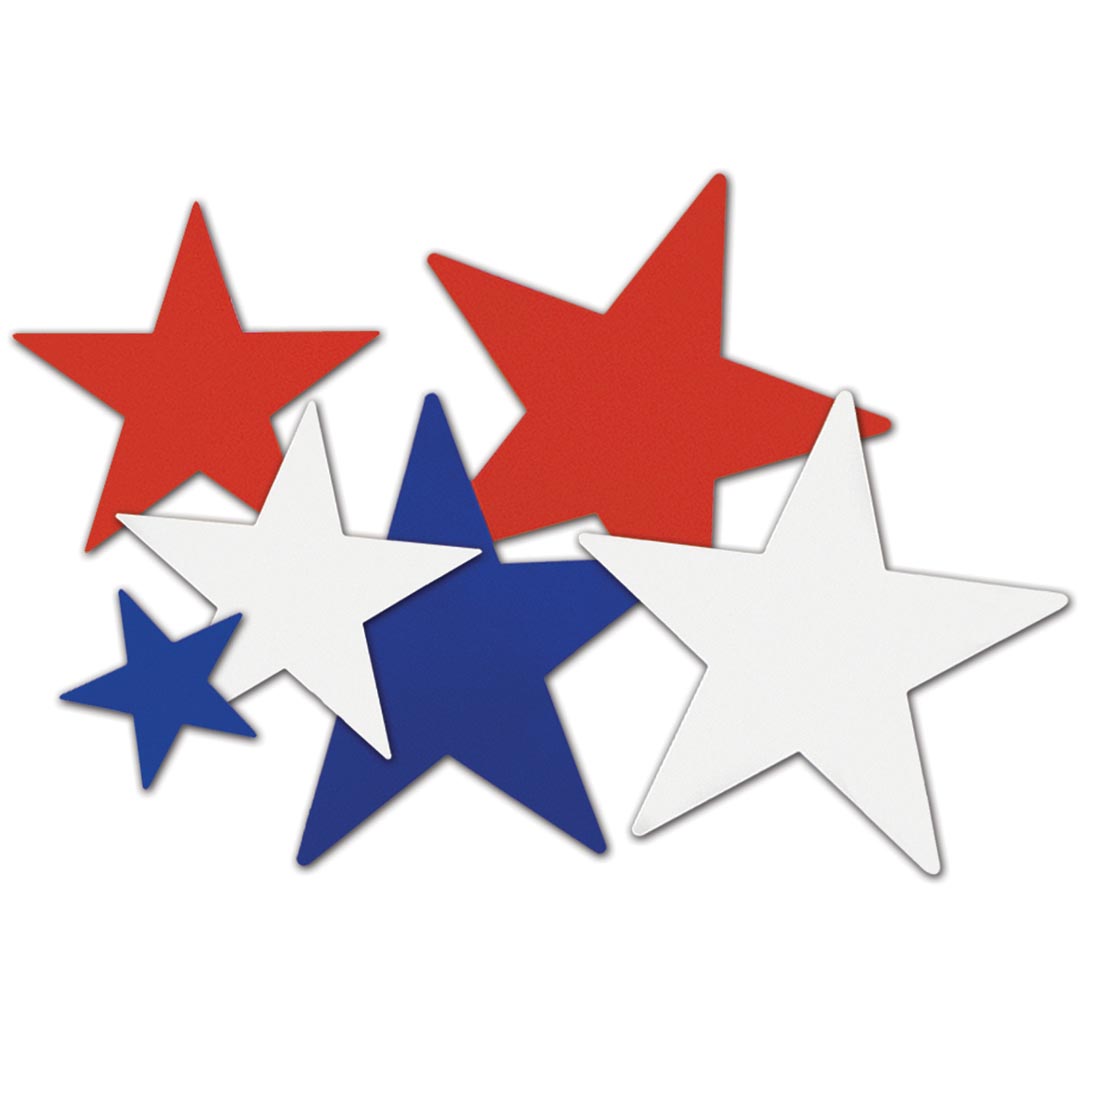 Patriotic Red, White and Blue Star Cutouts